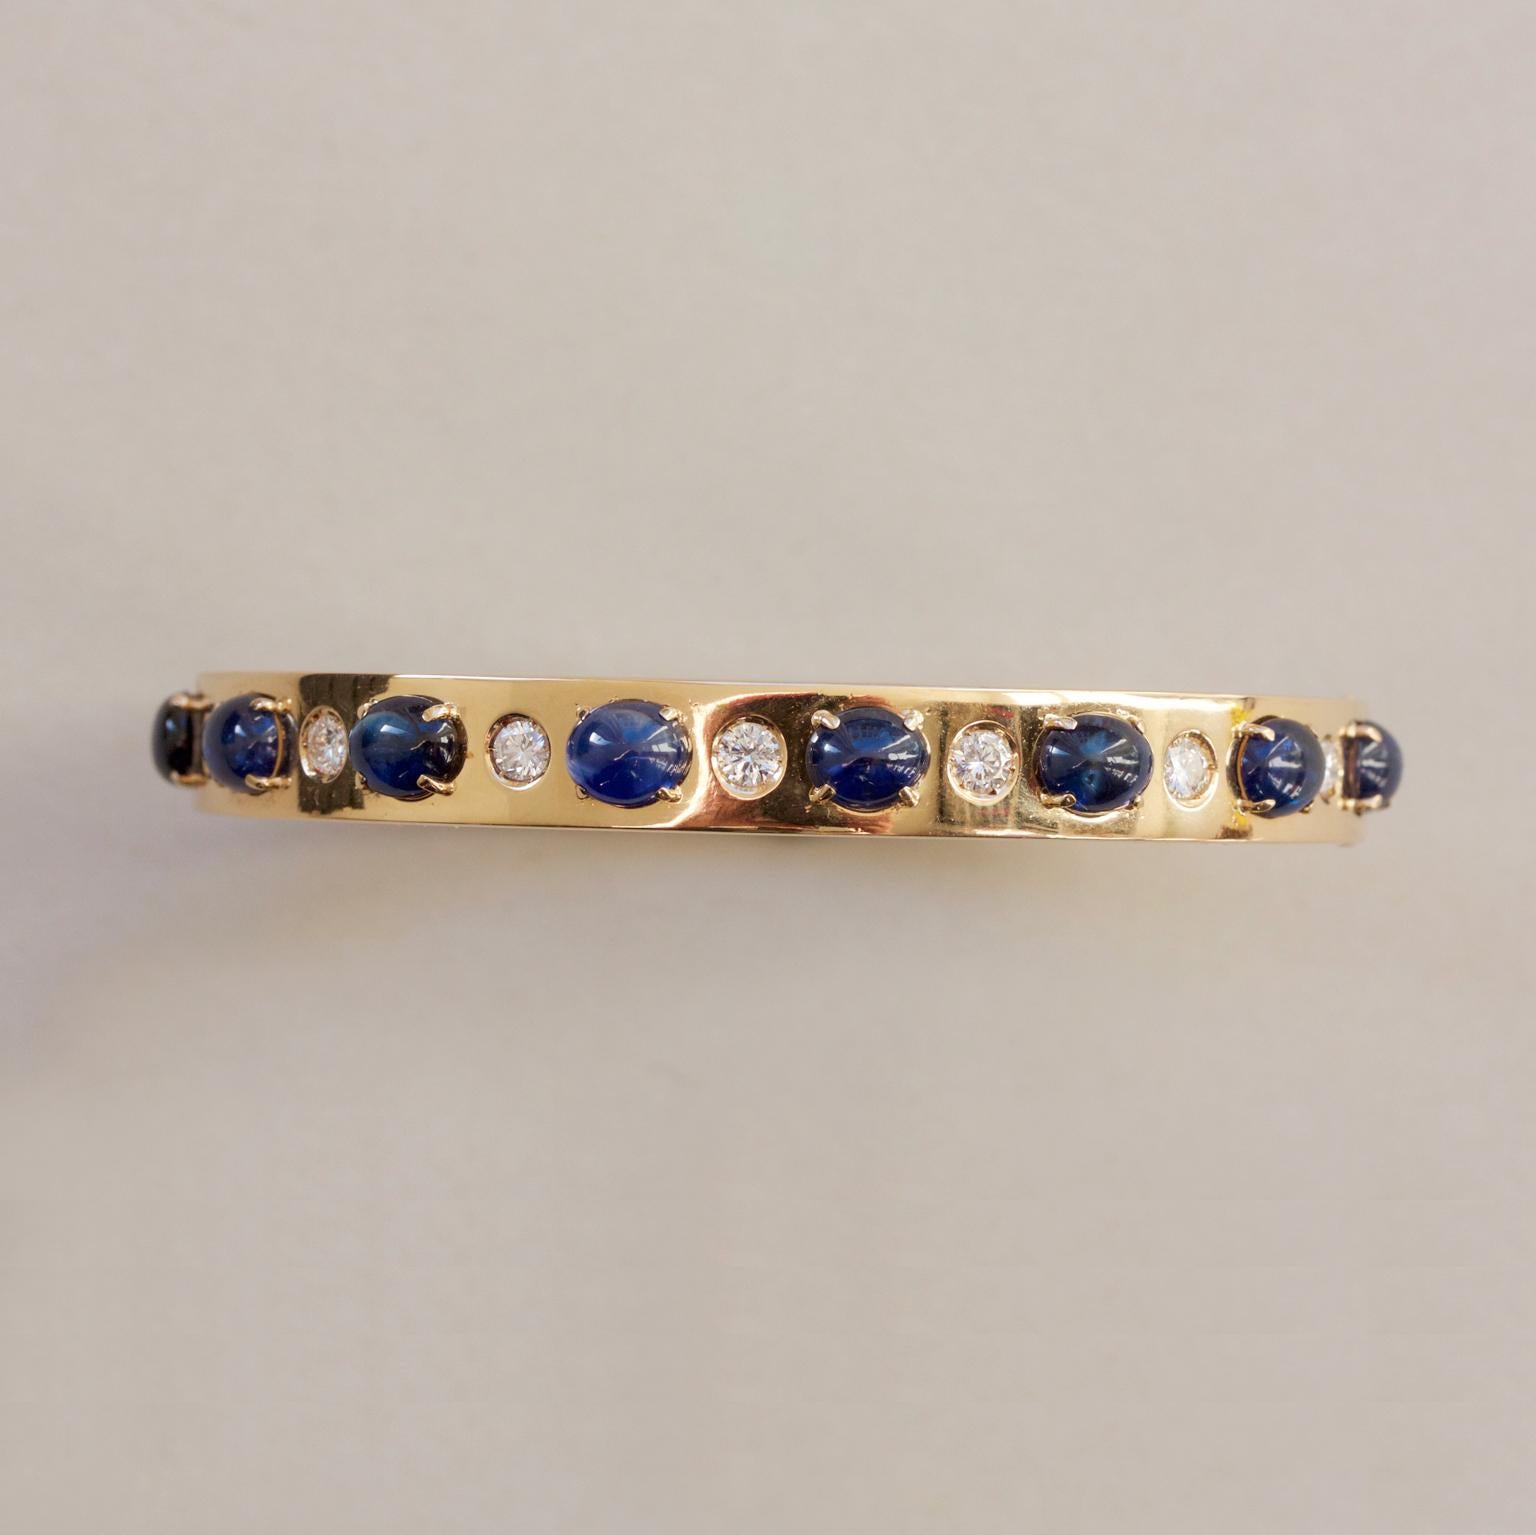 An 18 carat gold bangle set with eight oval cabochon cut sapphires (app. 7 carats), horizontally set in between which are seven brilliant cut diamonds (app. 0.42 carat), Italy, circa 1980.

circumference: 17-17.5 cm fits a 16-17 cm wrist
weight: